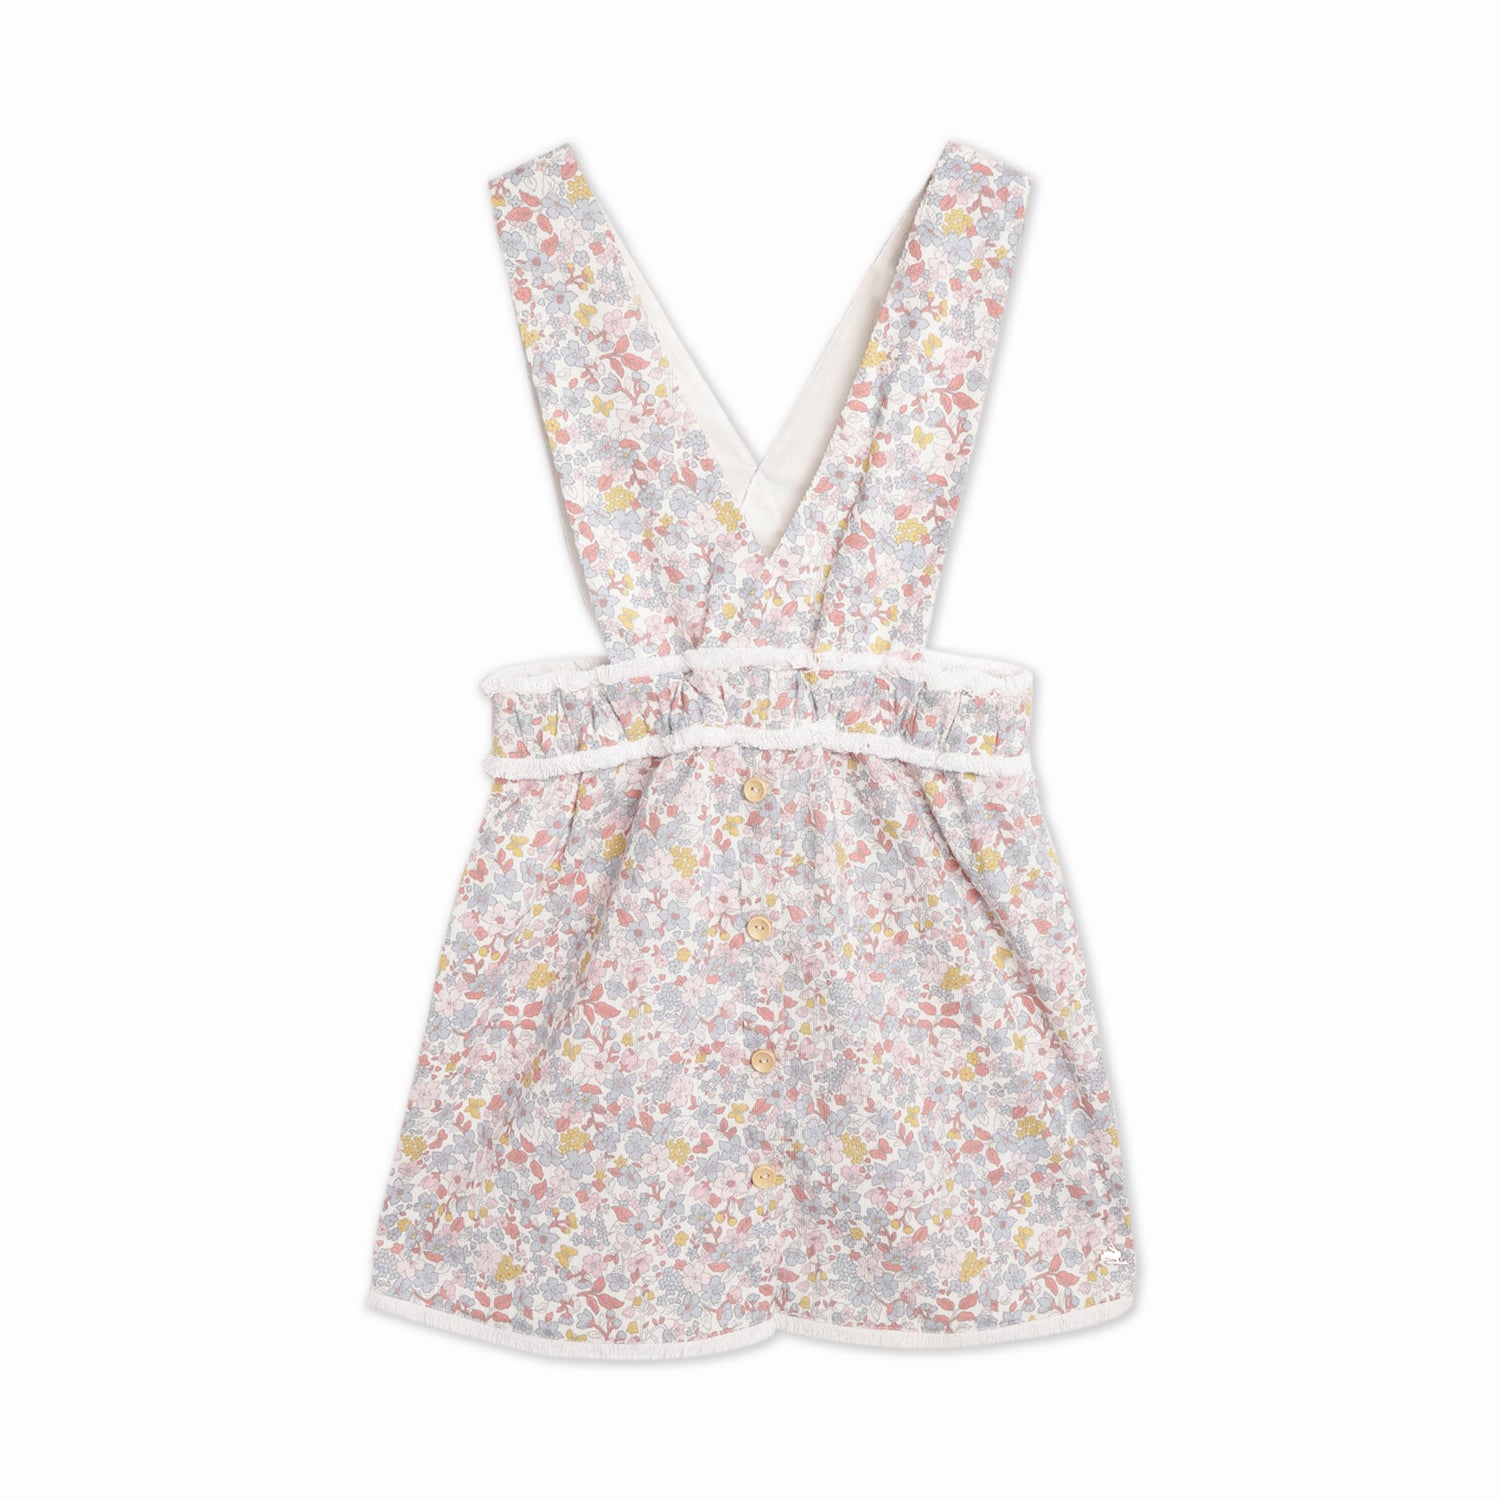 Cherry-Crumble-Kids-Girls-Sleevless--Square-Neck-Full-Length-Floral-Dress-Dungaree